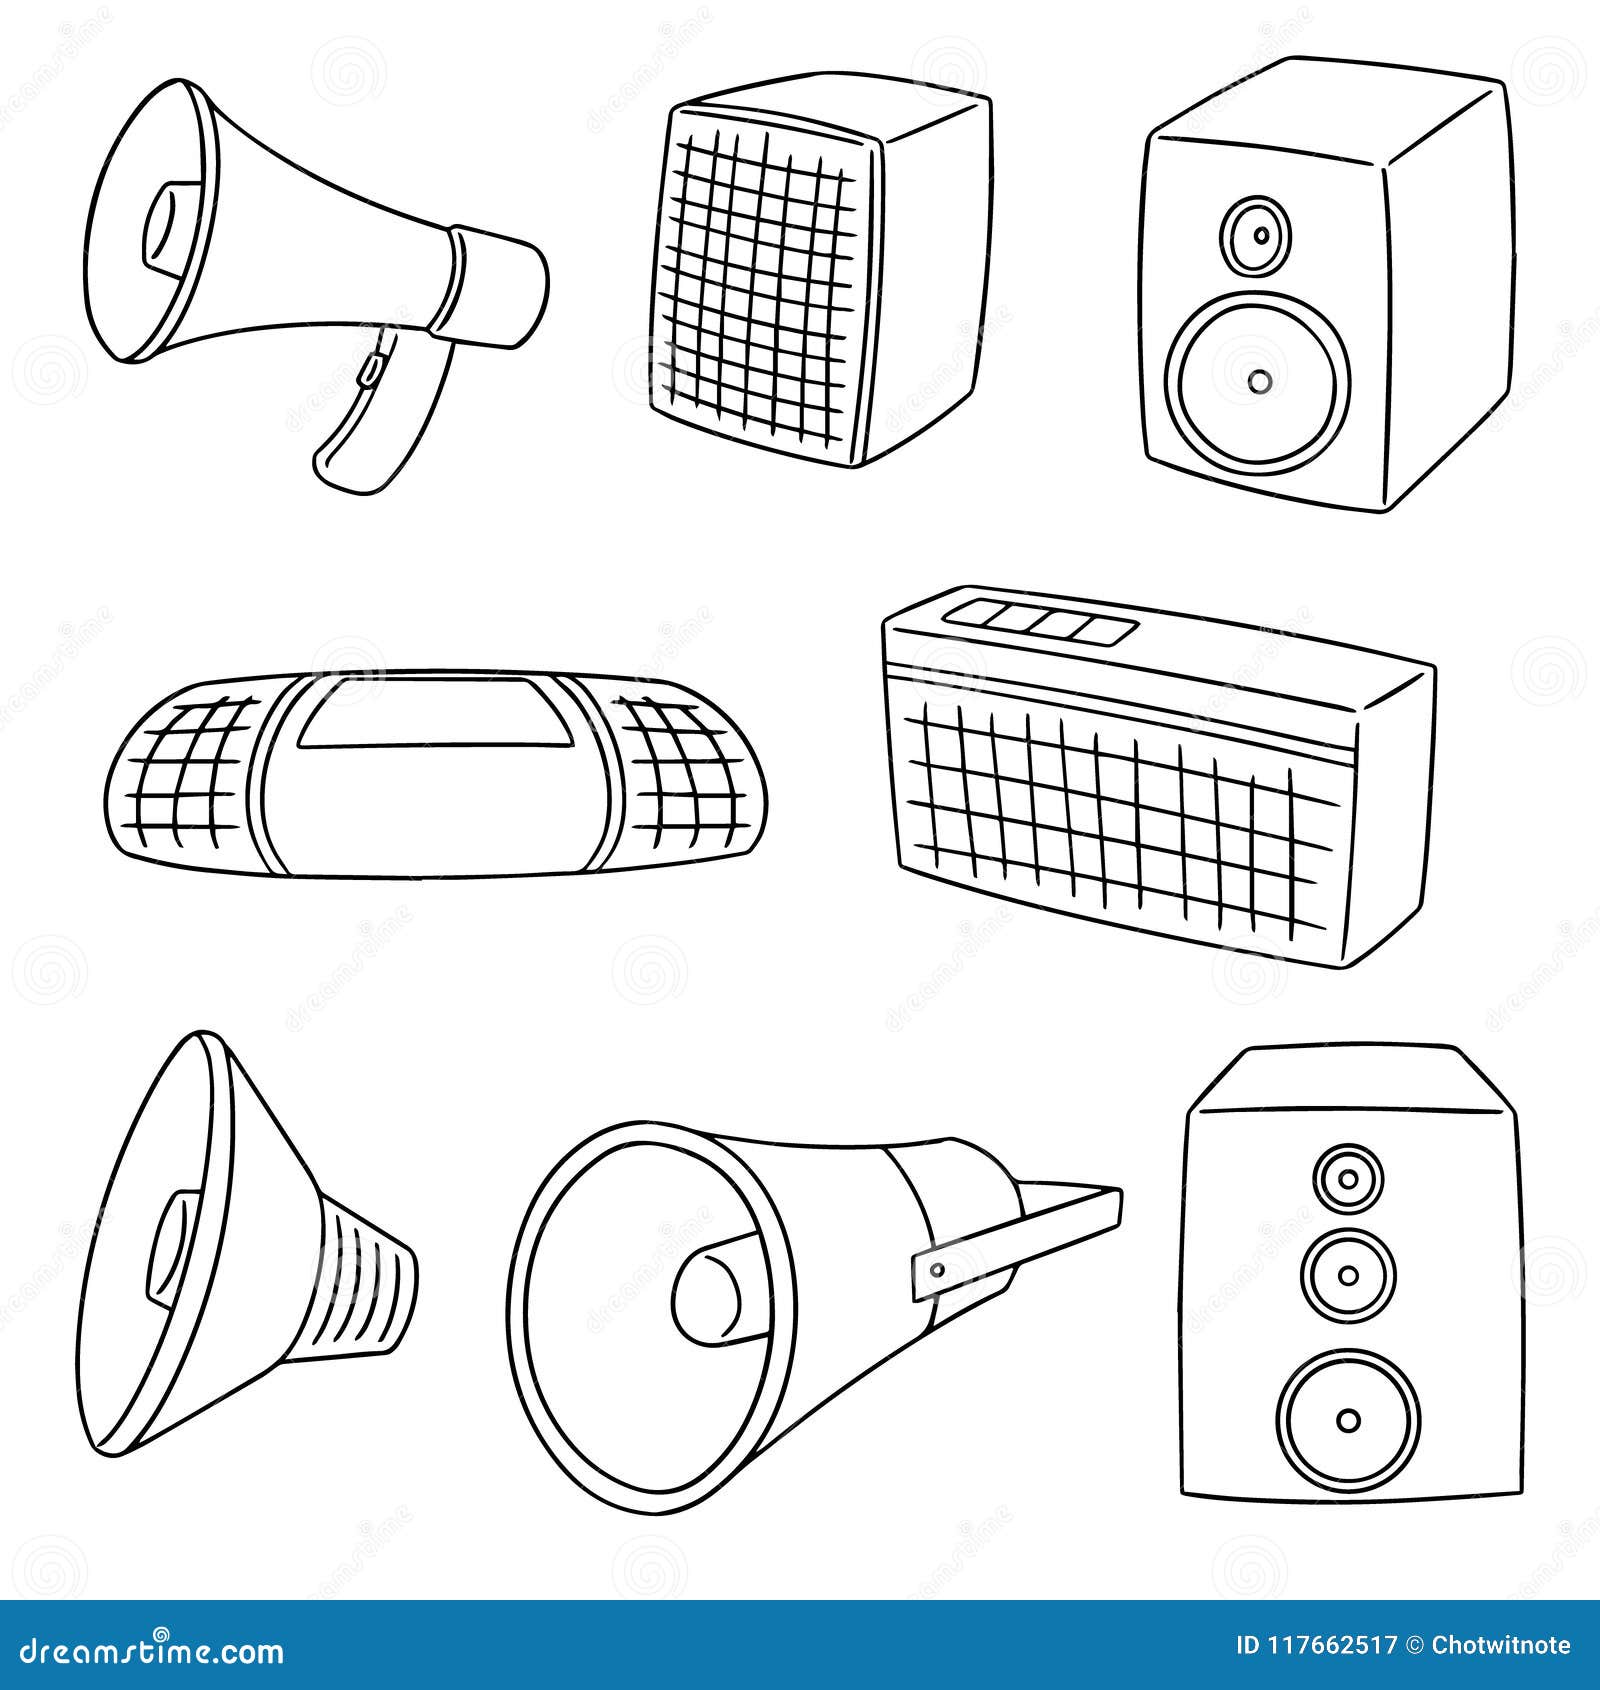 How to draw Speakers step by step easily - YouTube